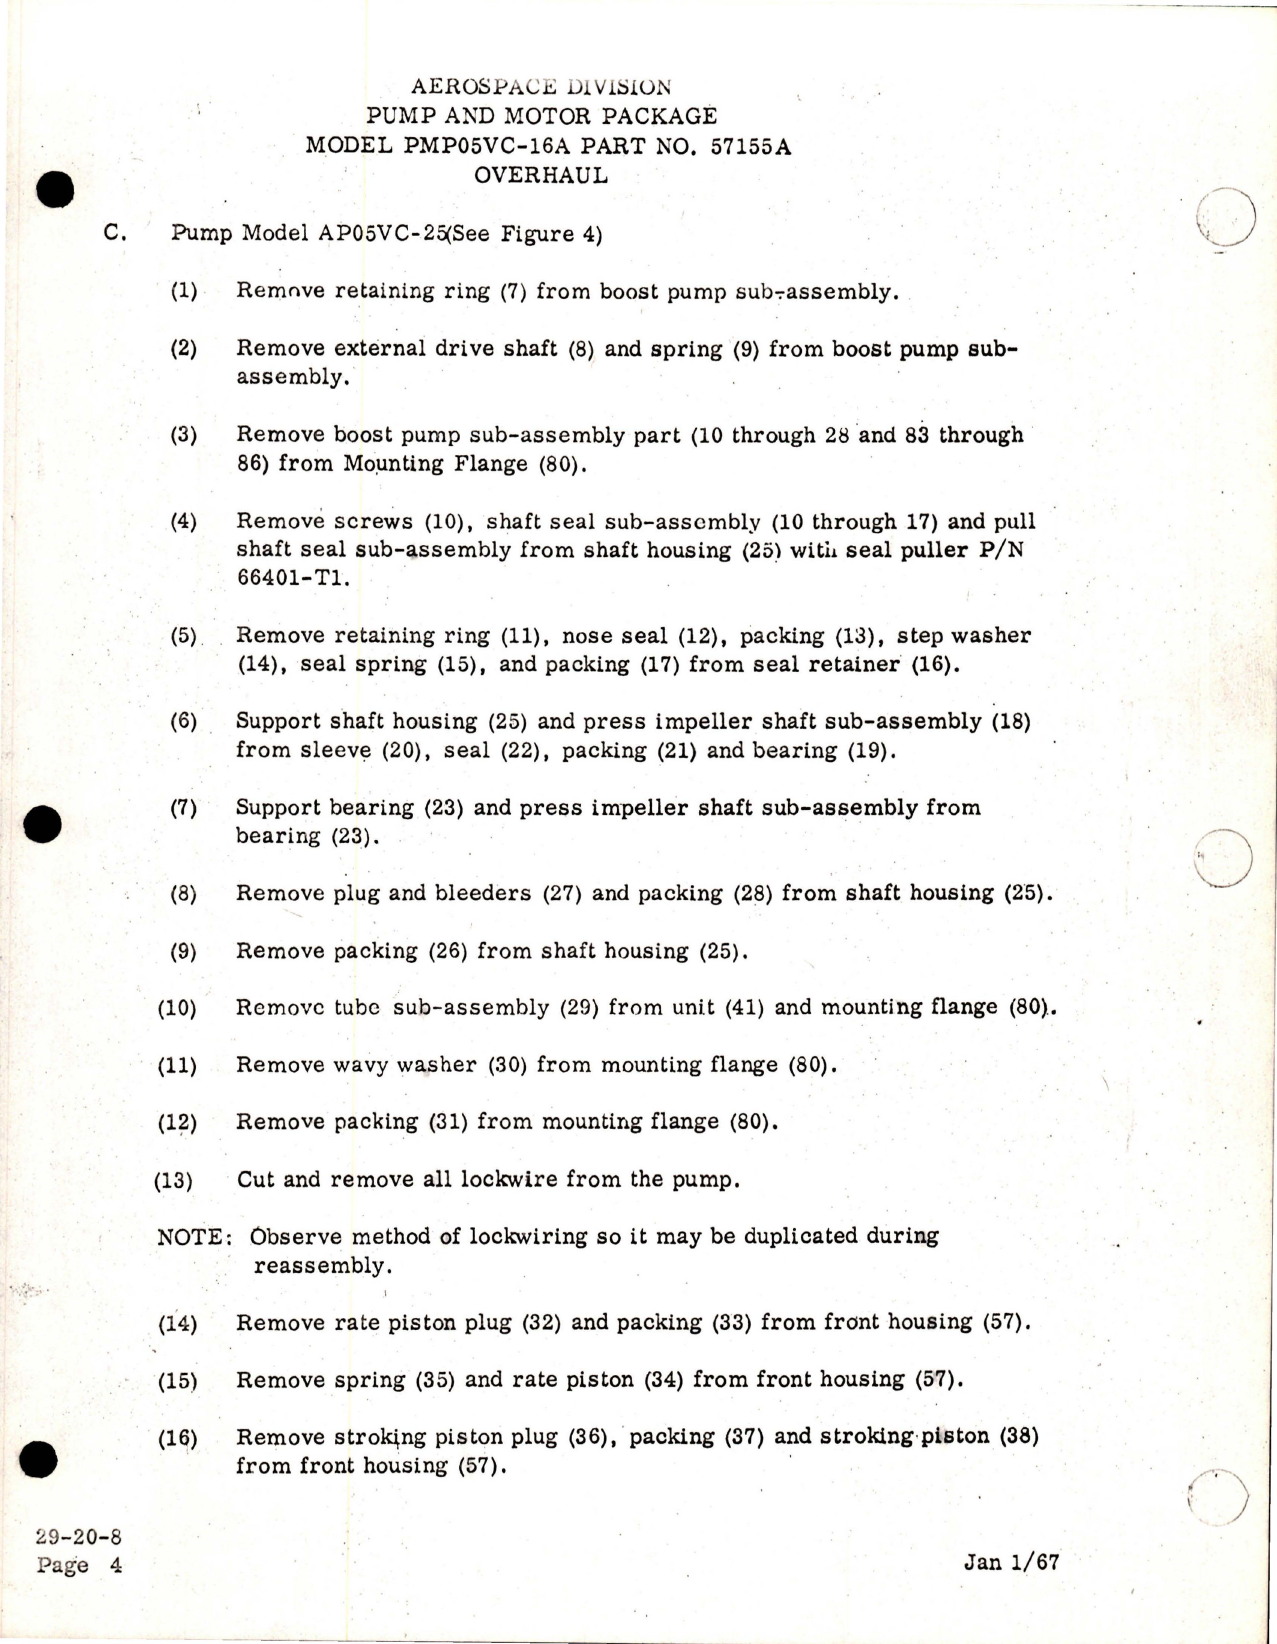 Sample page 9 from AirCorps Library document: Overhaul Manual for Hydraulic Pump and Motor Package - Part 57155A - Model PMP05VC-16A 